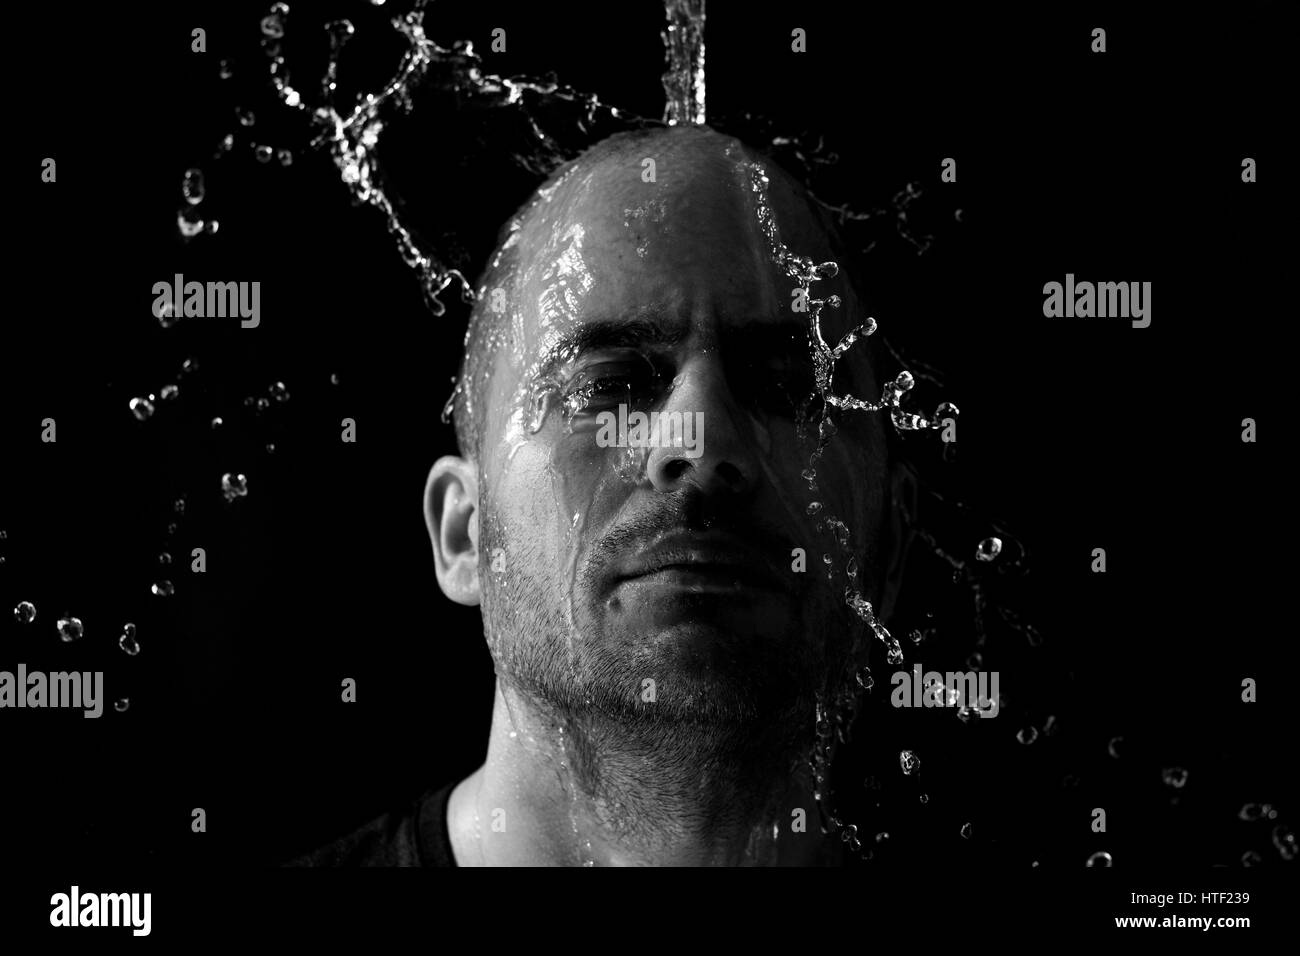 Portrait of a man being thrown water in the face against a black background Stock Photo